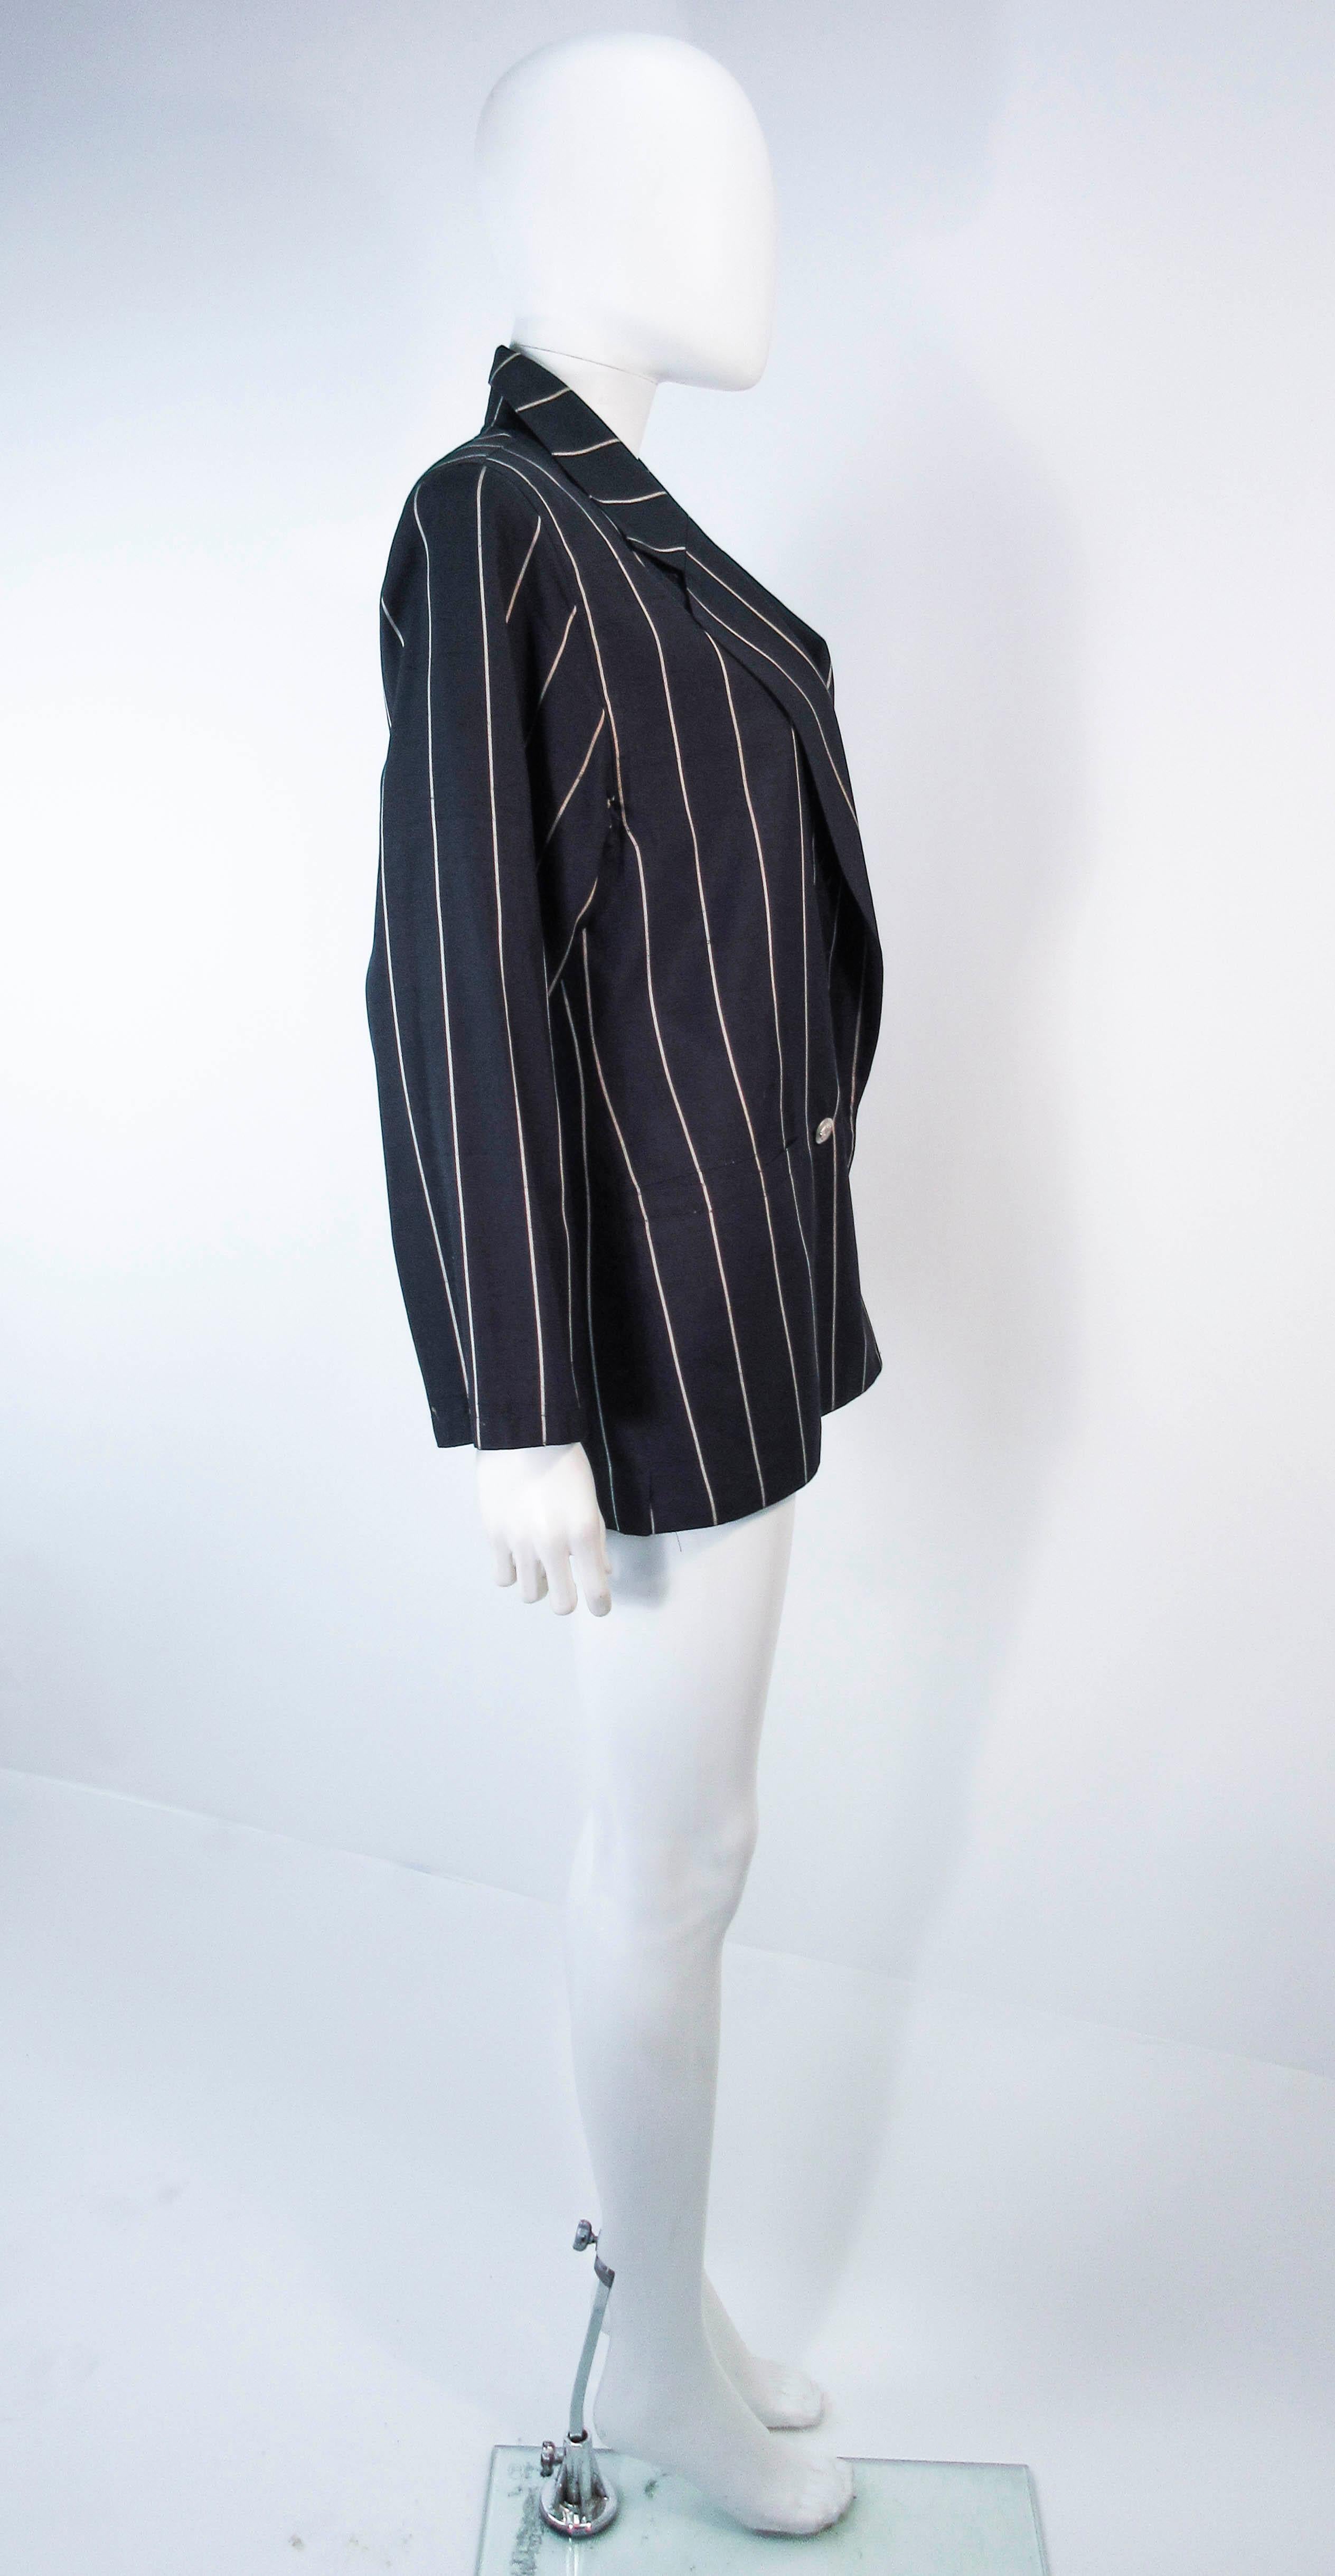 GIANNI VERSACE Black & Cream Striped Jacket Size 6 For Sale 7